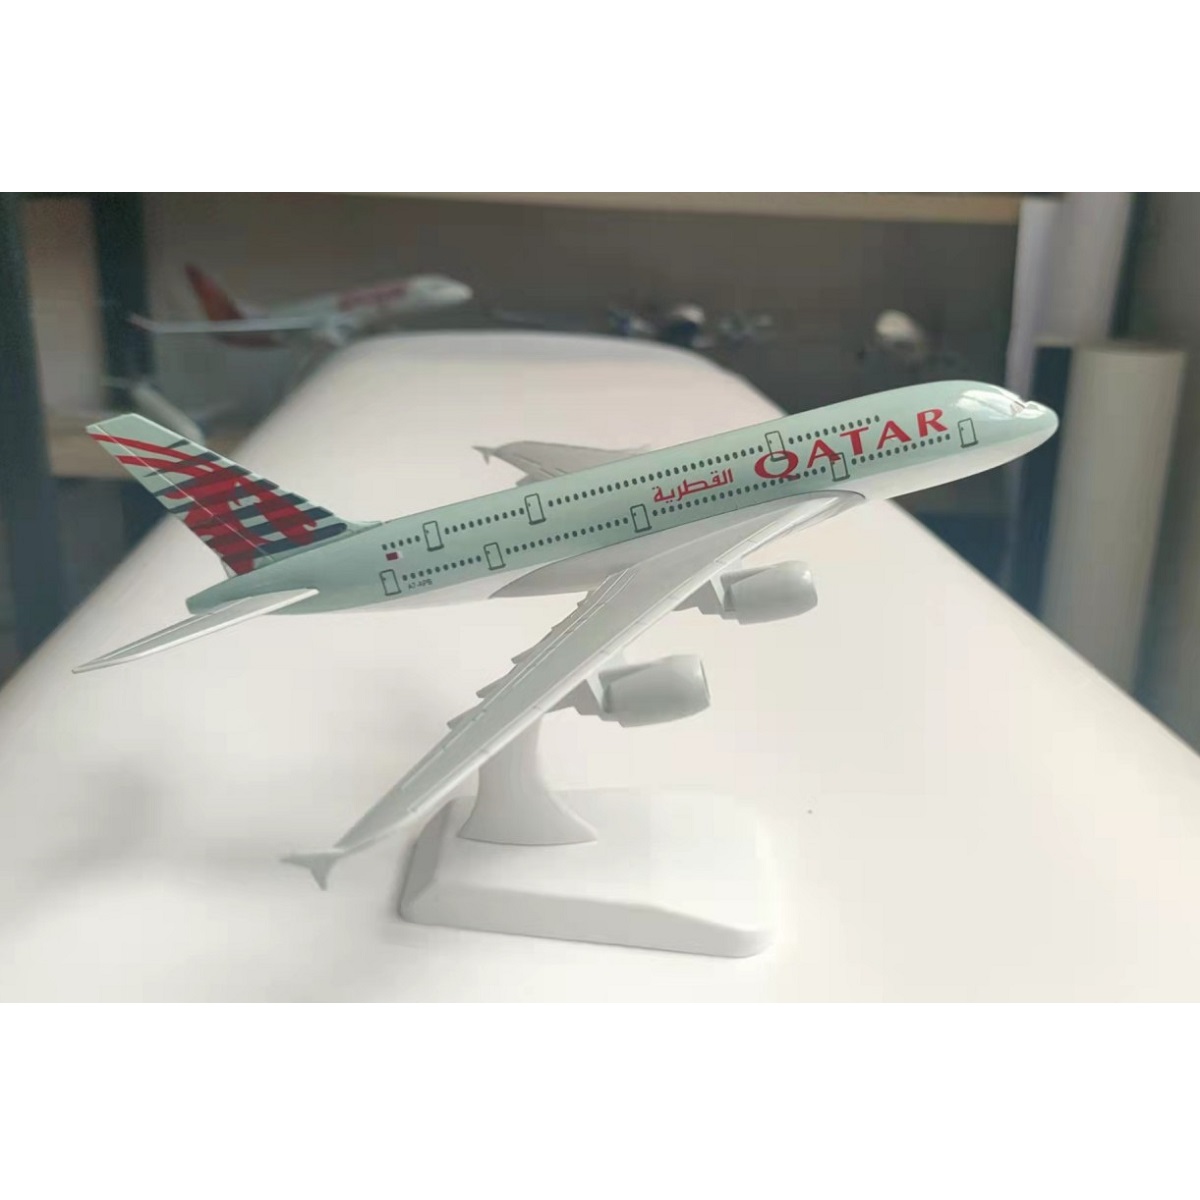 Qatar Airways Airbus A380 Replica Toy Model with Stand